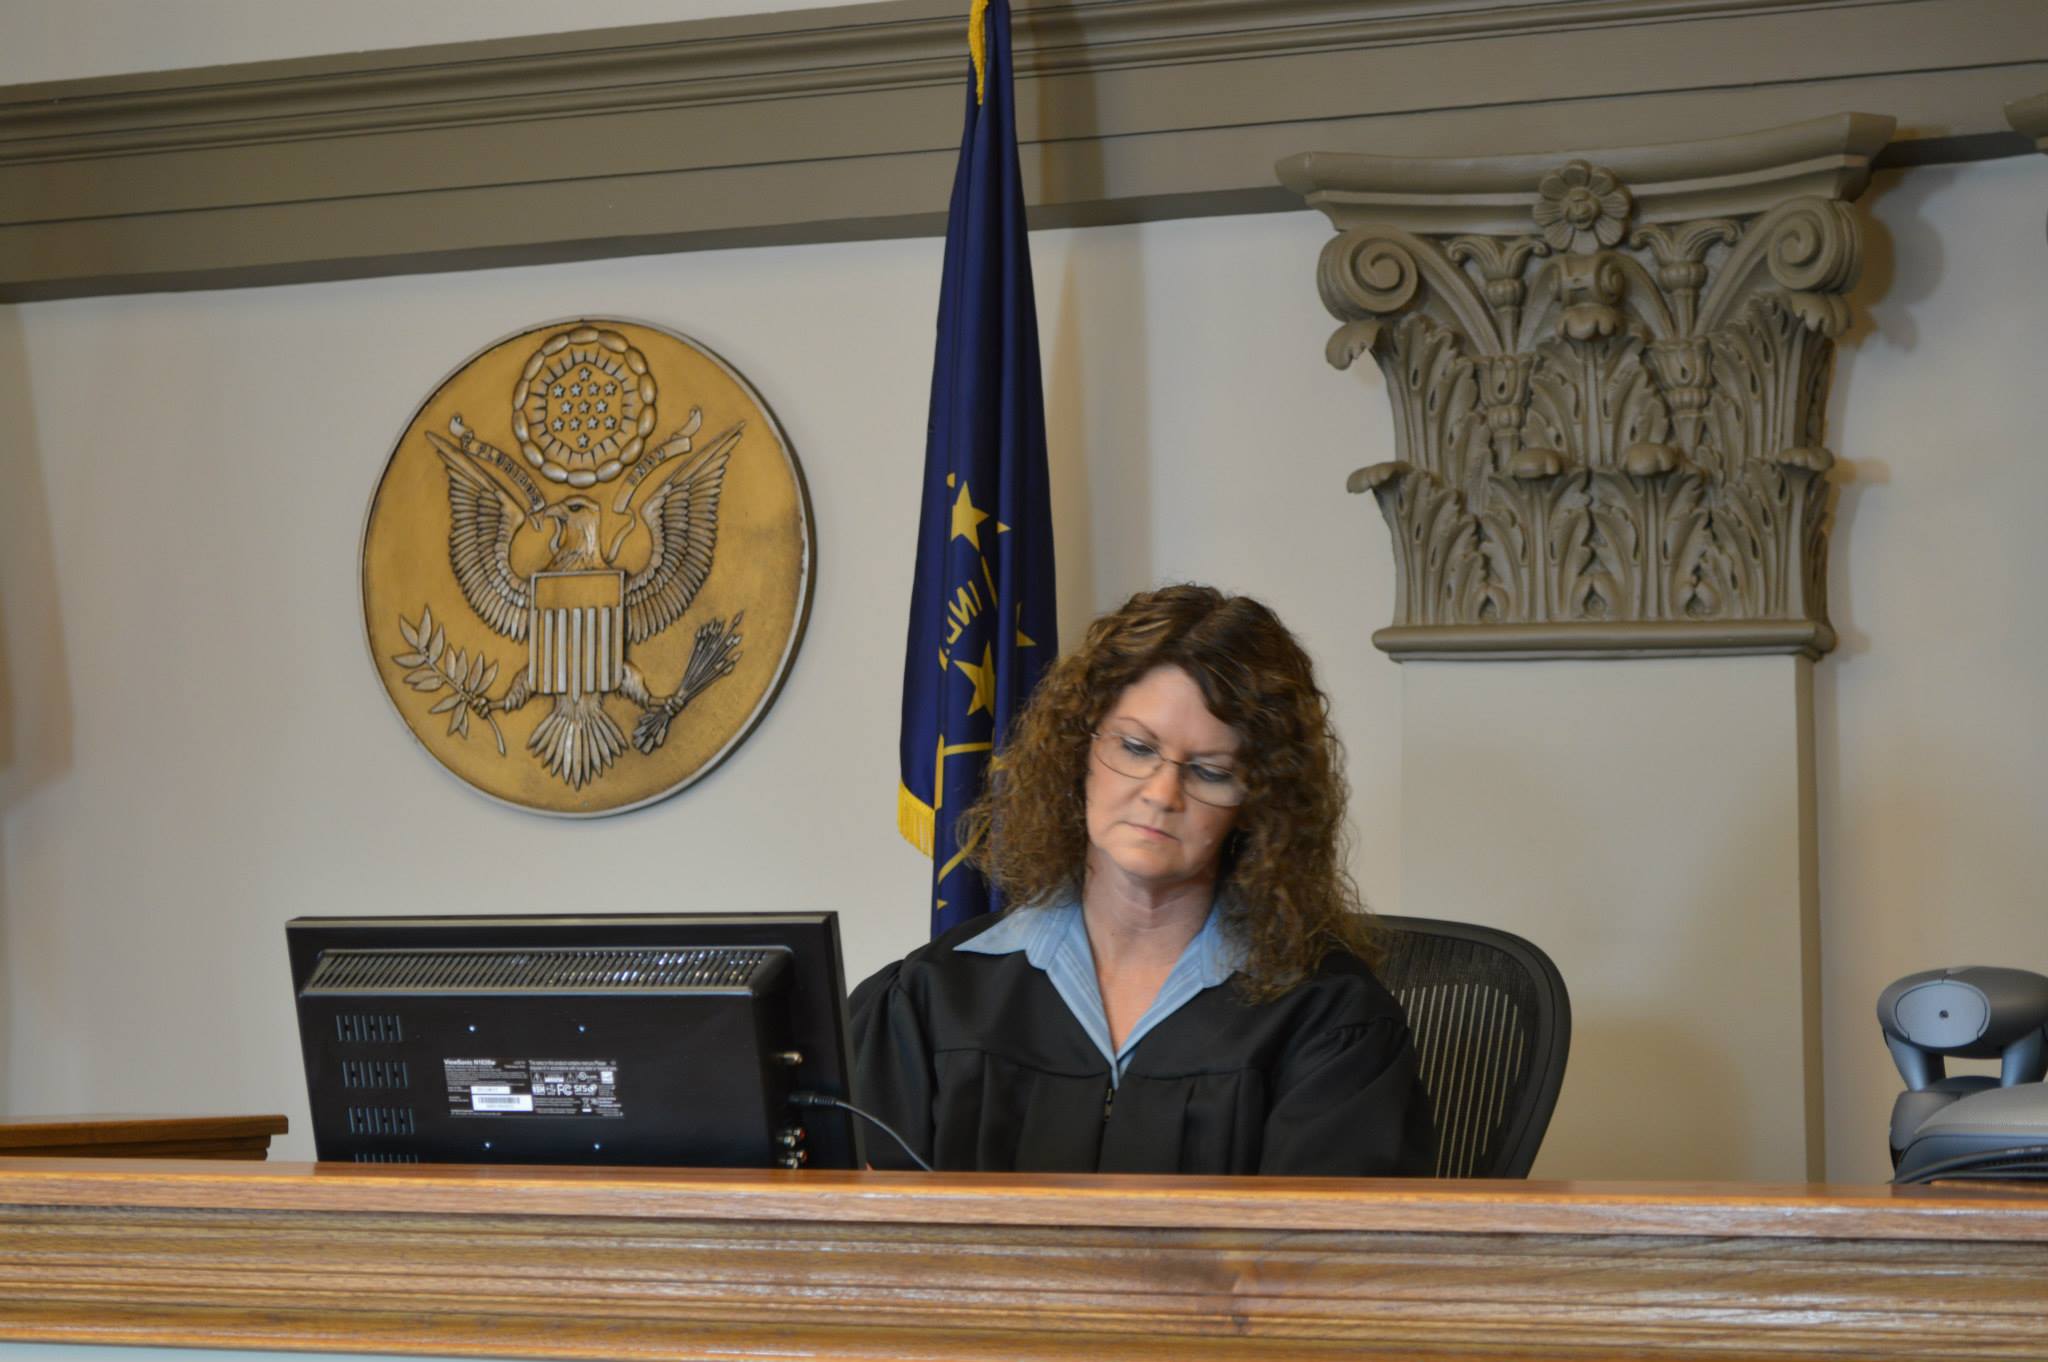 Kimberly J. Richardson On the set of VANISHED as The Honorable Judge Ann Miller